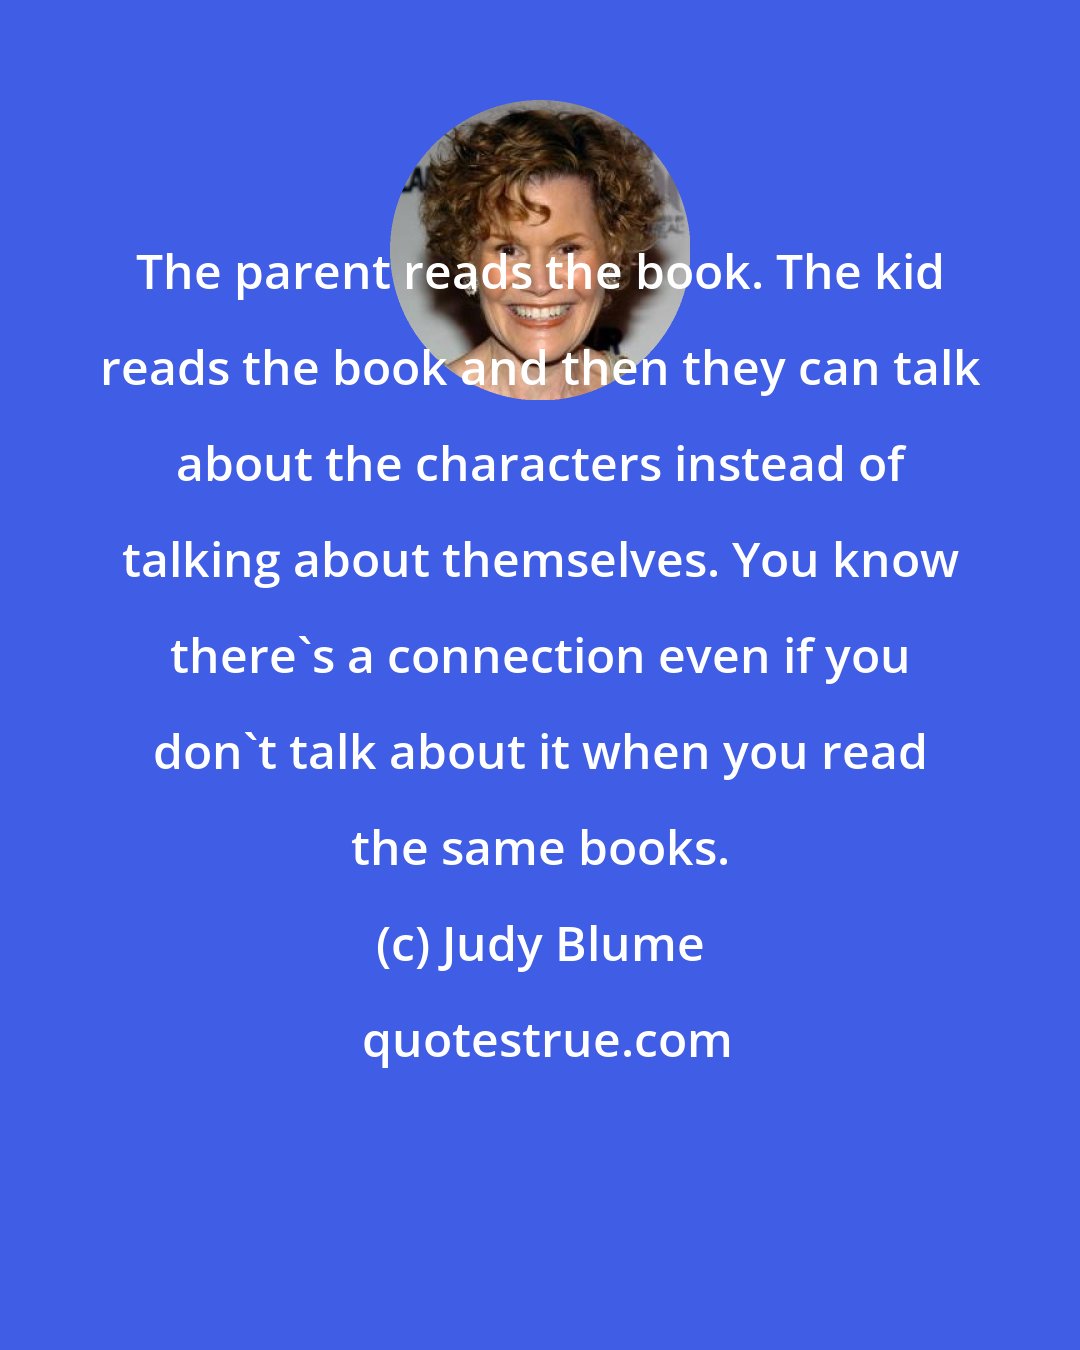 Judy Blume: The parent reads the book. The kid reads the book and then they can talk about the characters instead of talking about themselves. You know there's a connection even if you don't talk about it when you read the same books.